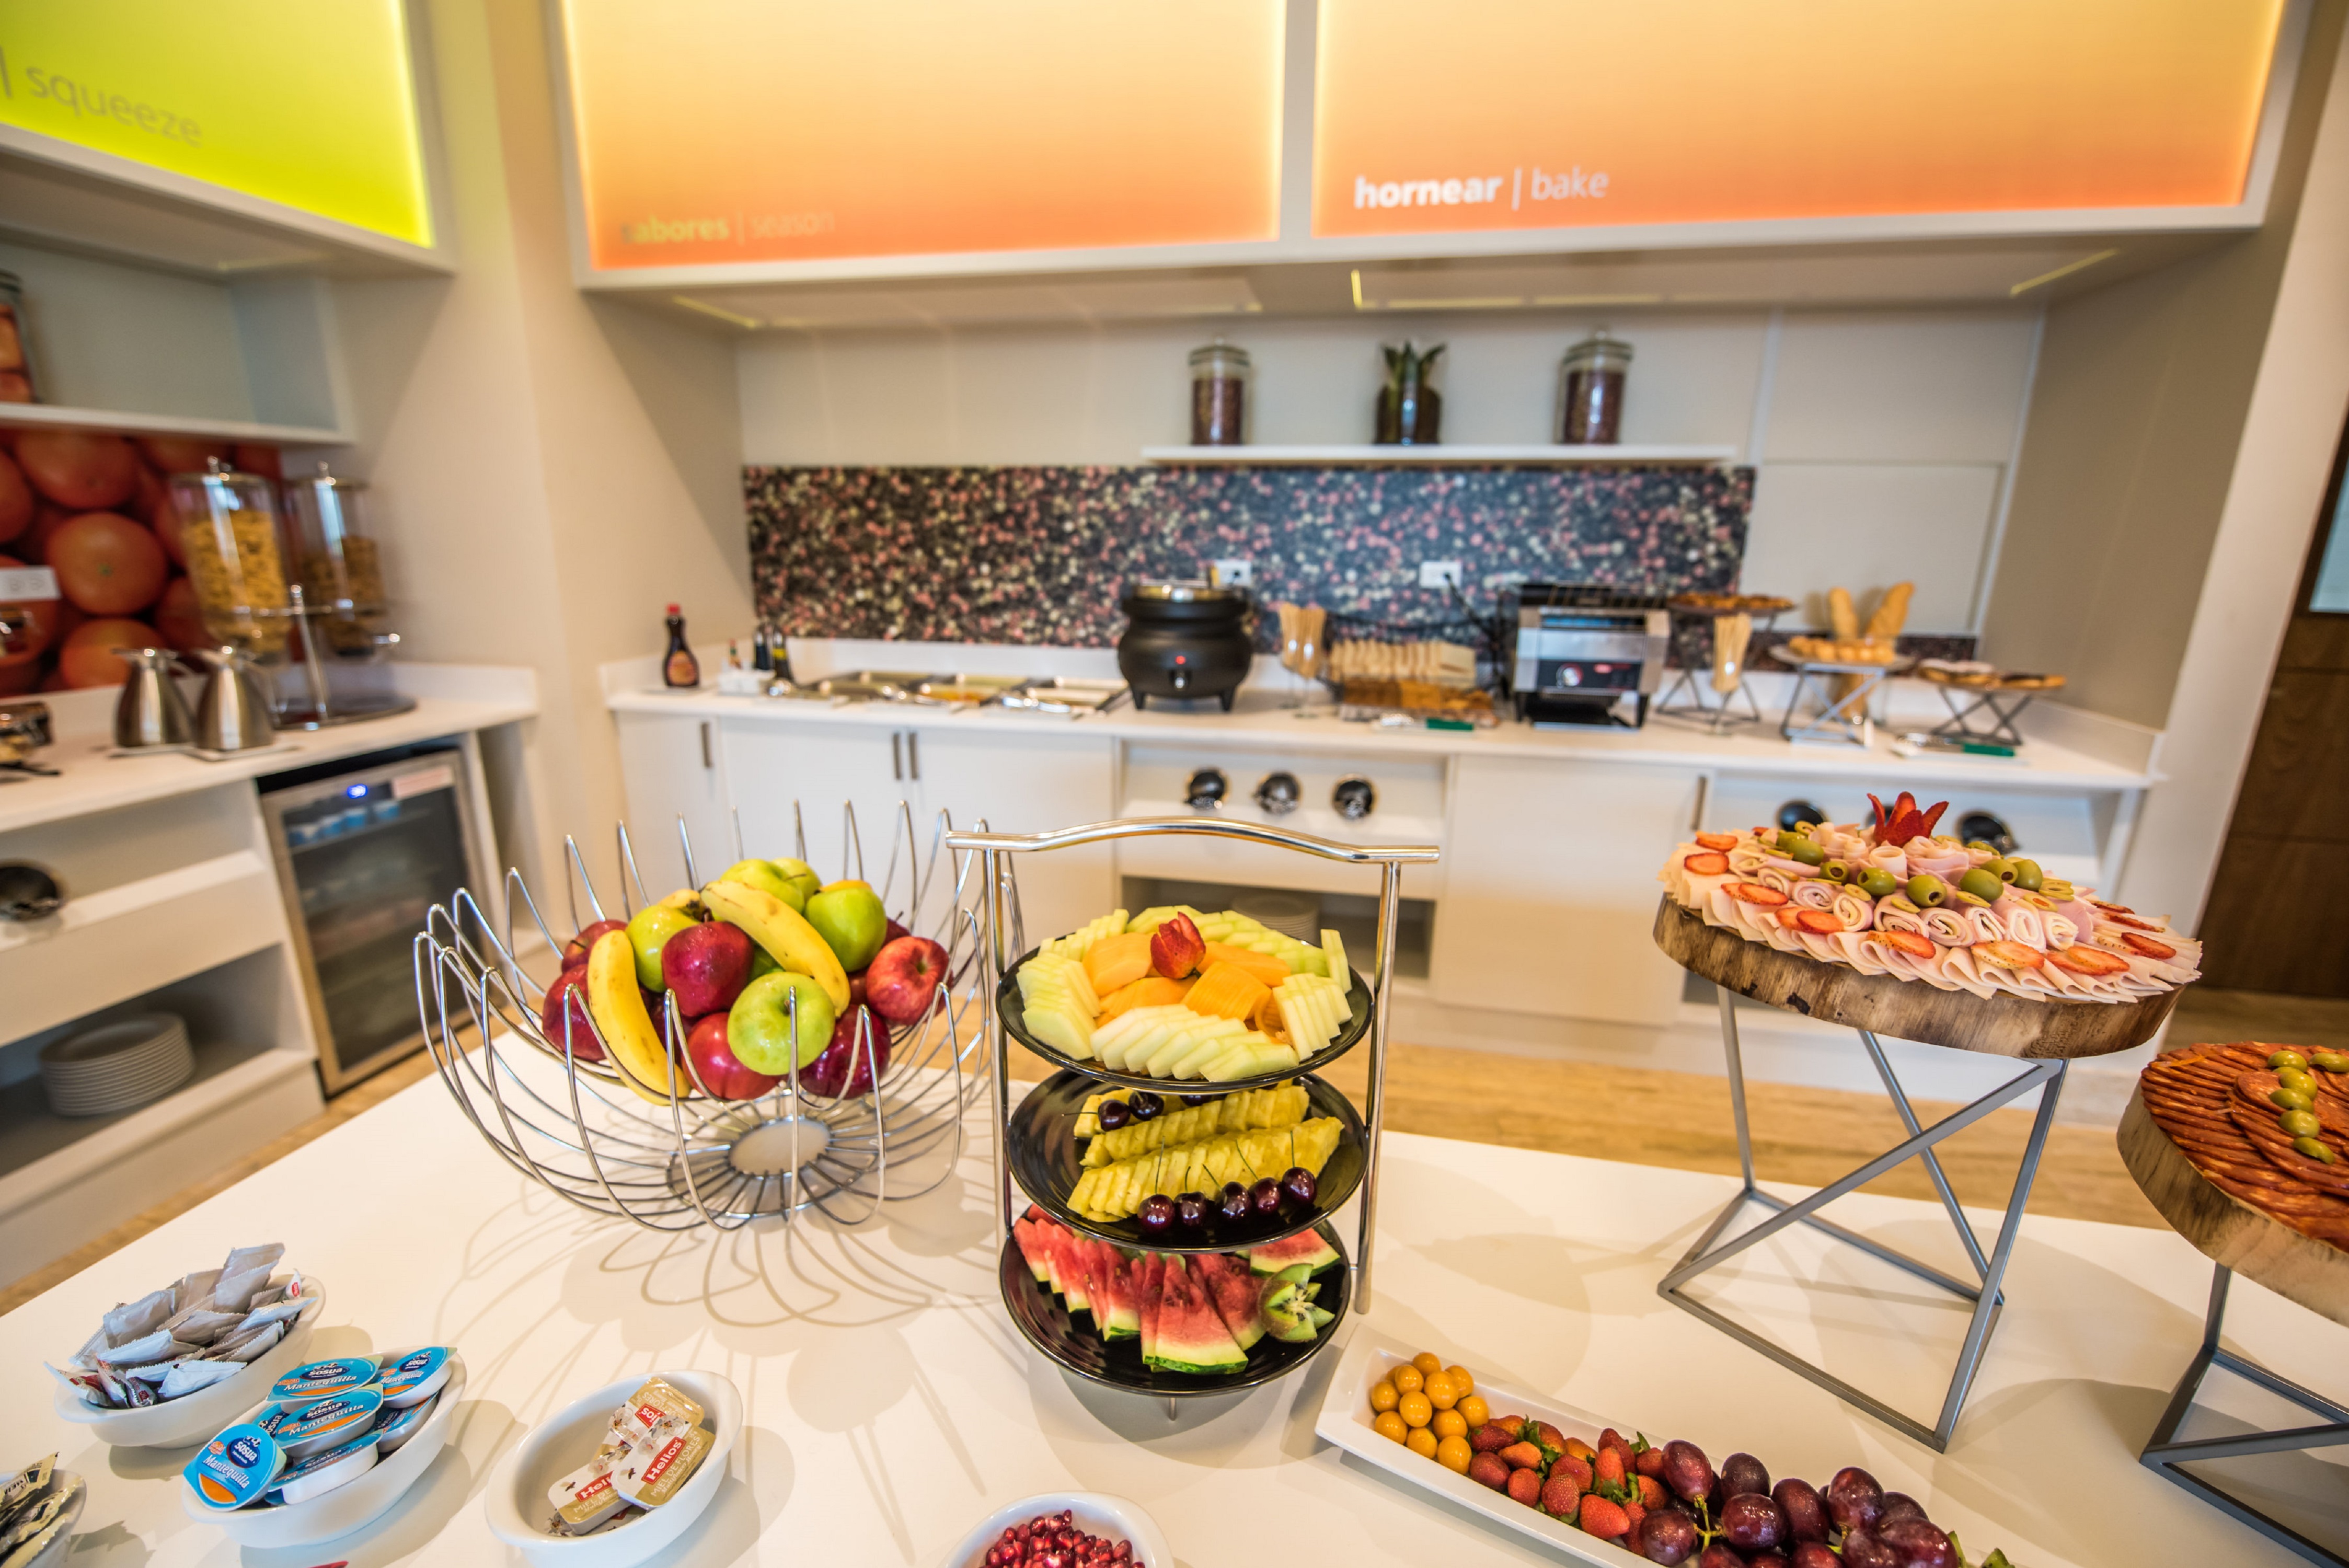 Breakfast Buffet Food Counters with Fruit Bowl and Fruit Dishes